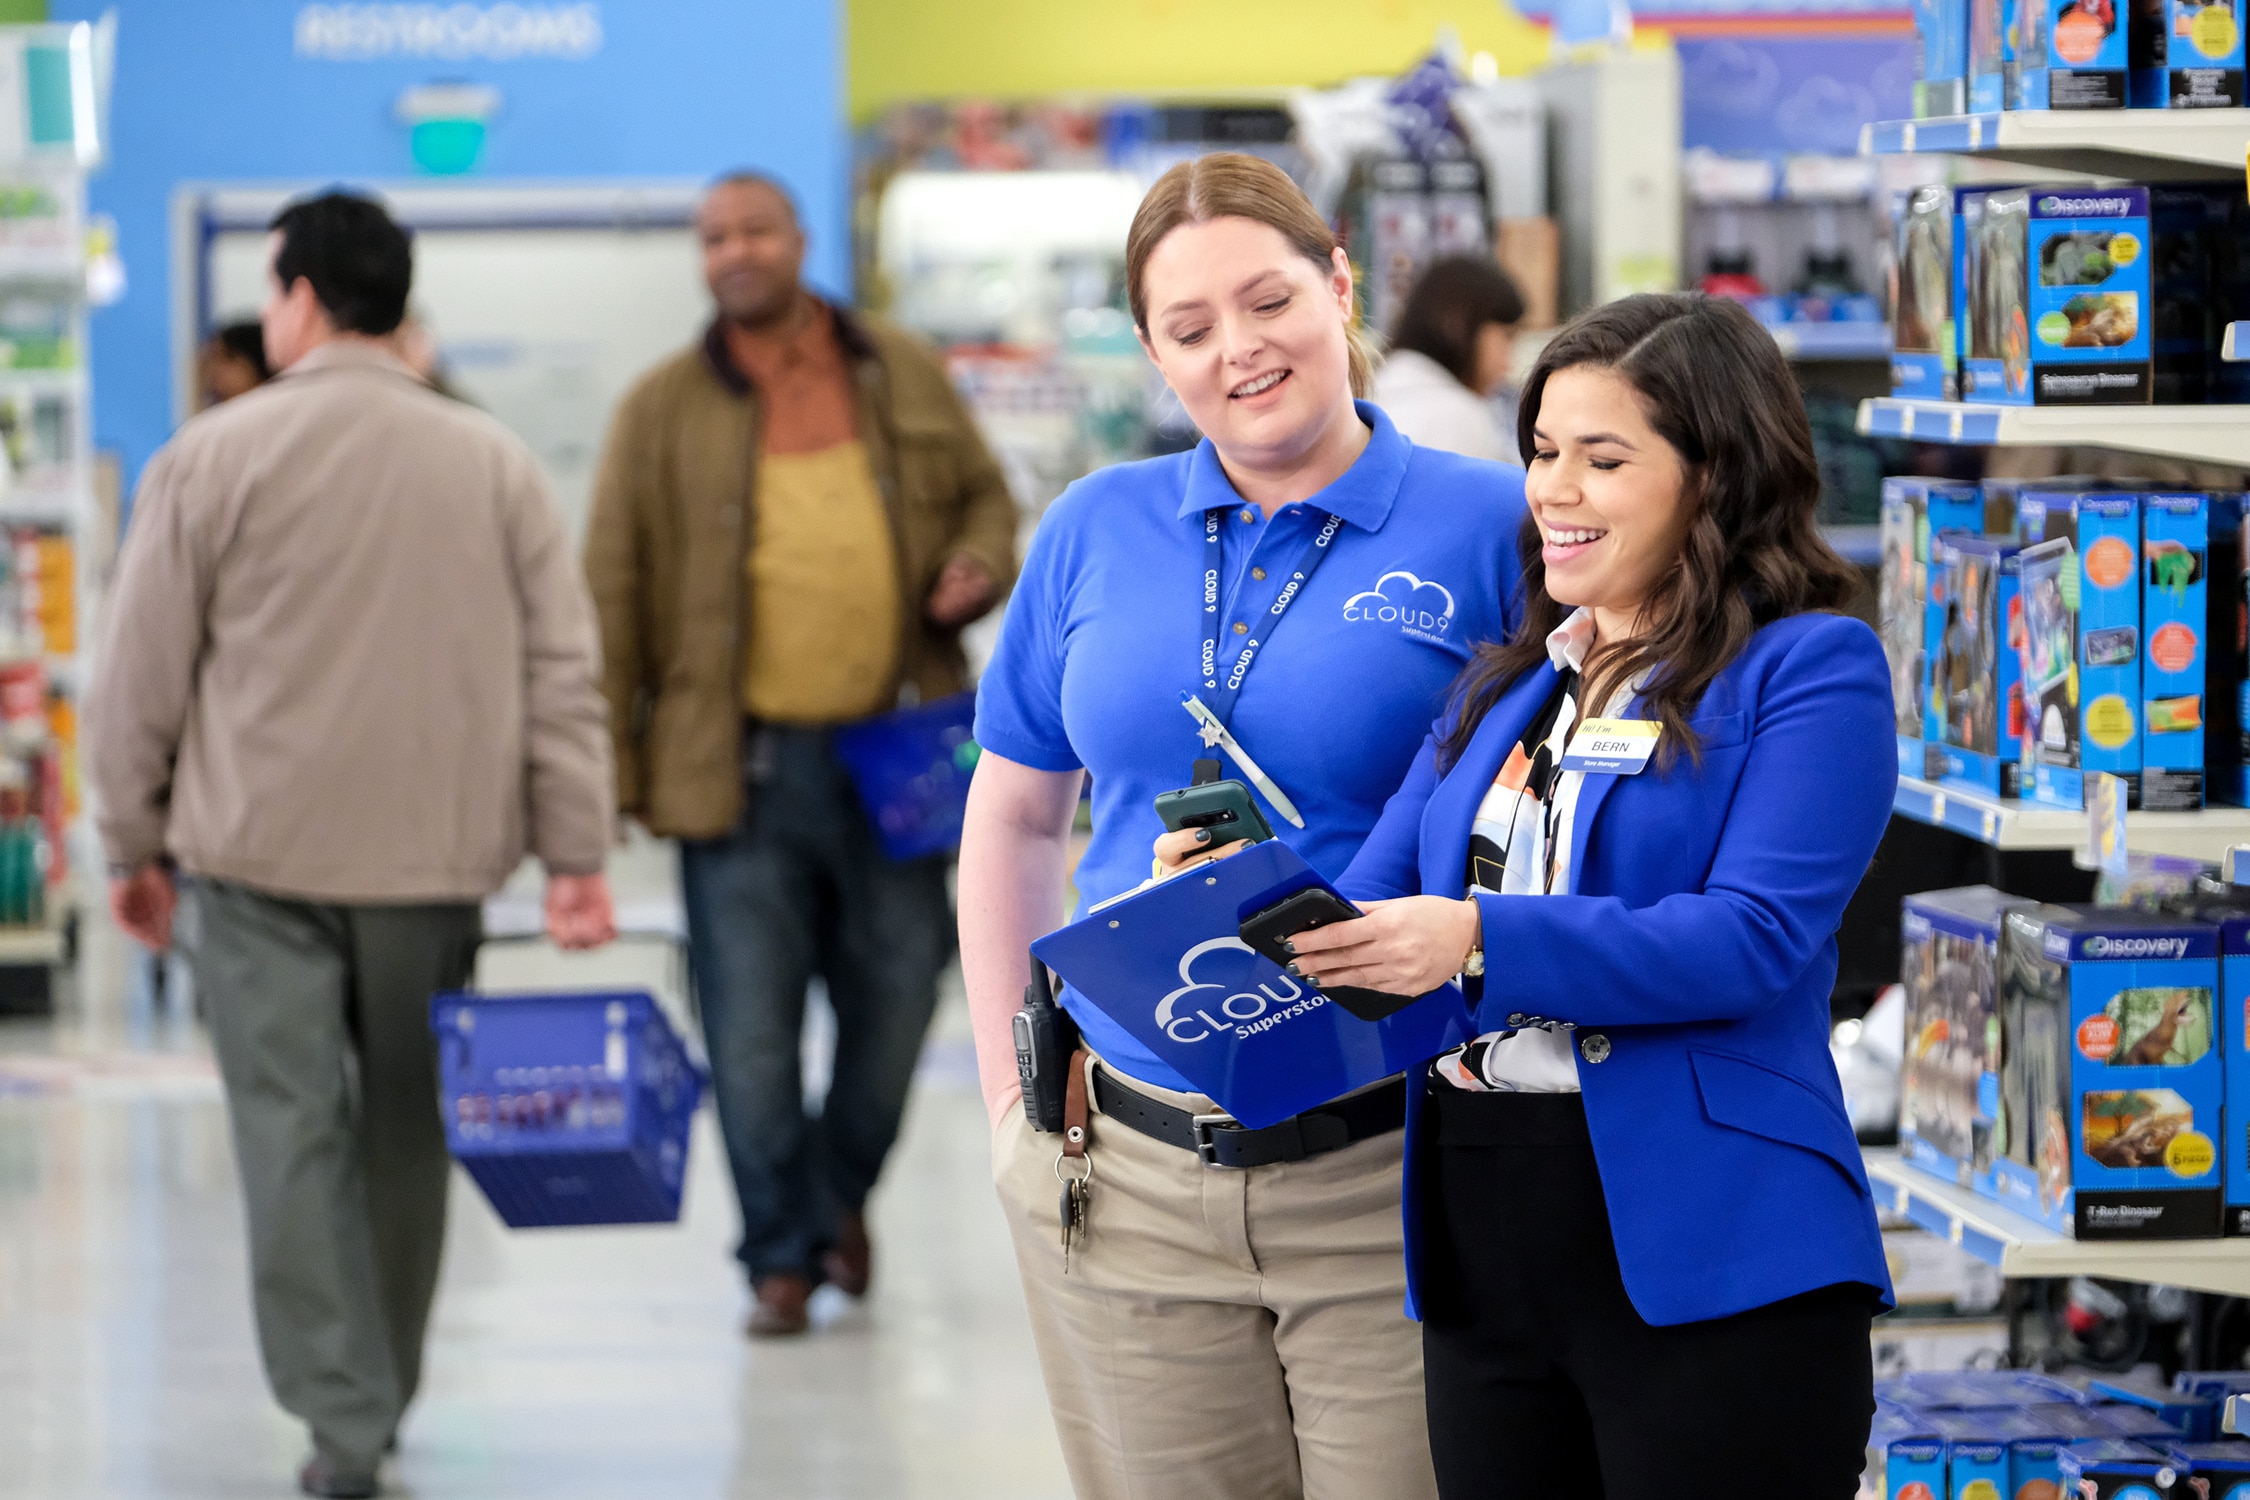 View photos from Superstore Employee App on NBC.com. 